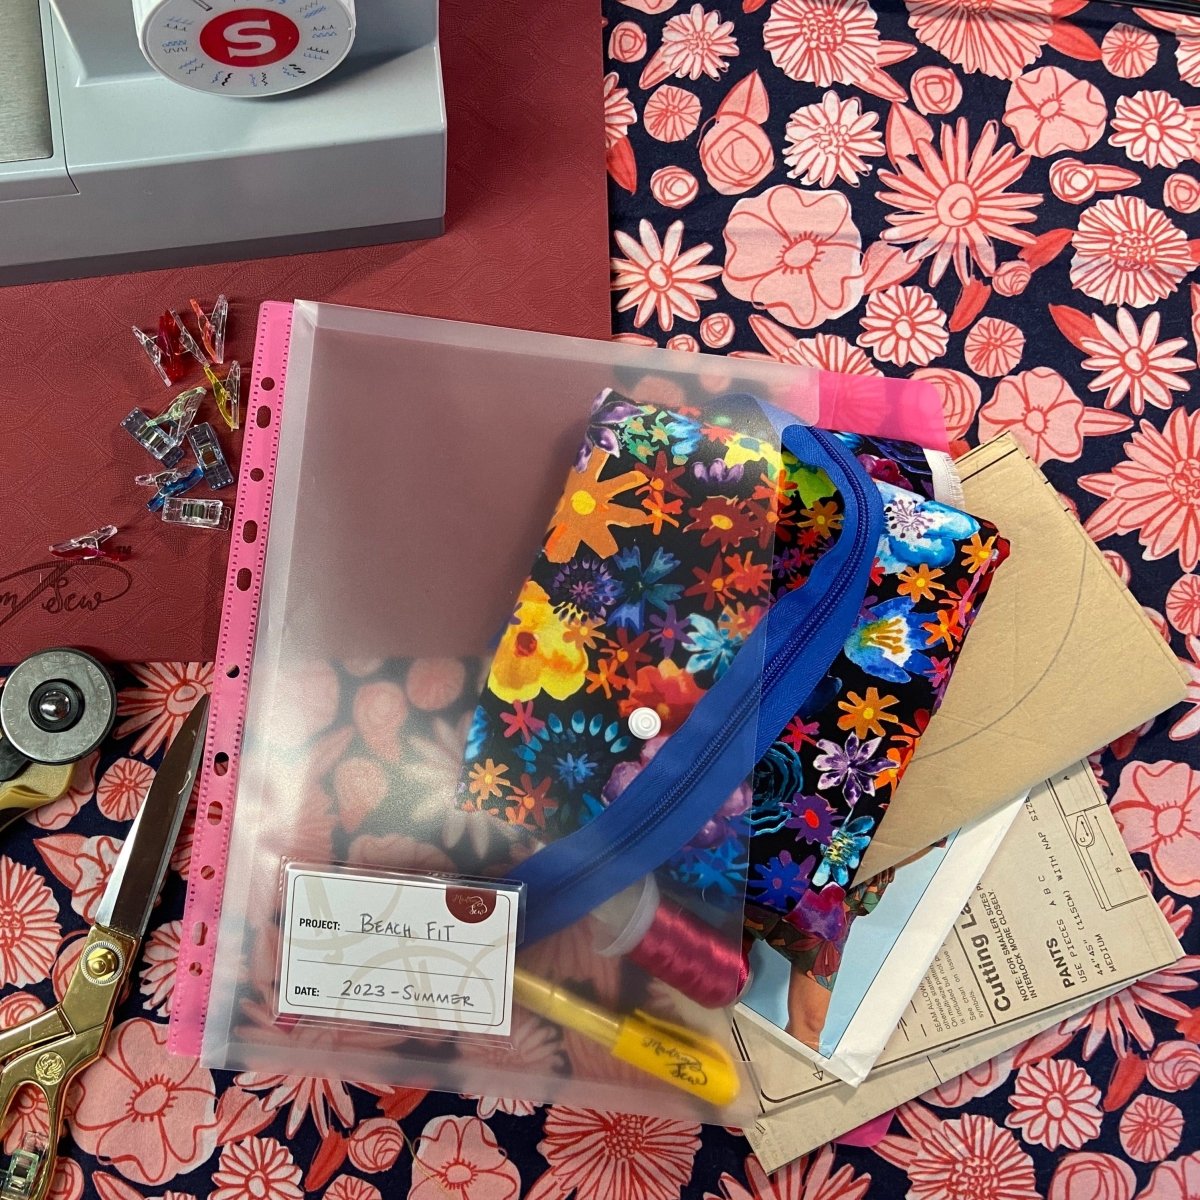 A Binder Pocket organizing your quilting projects